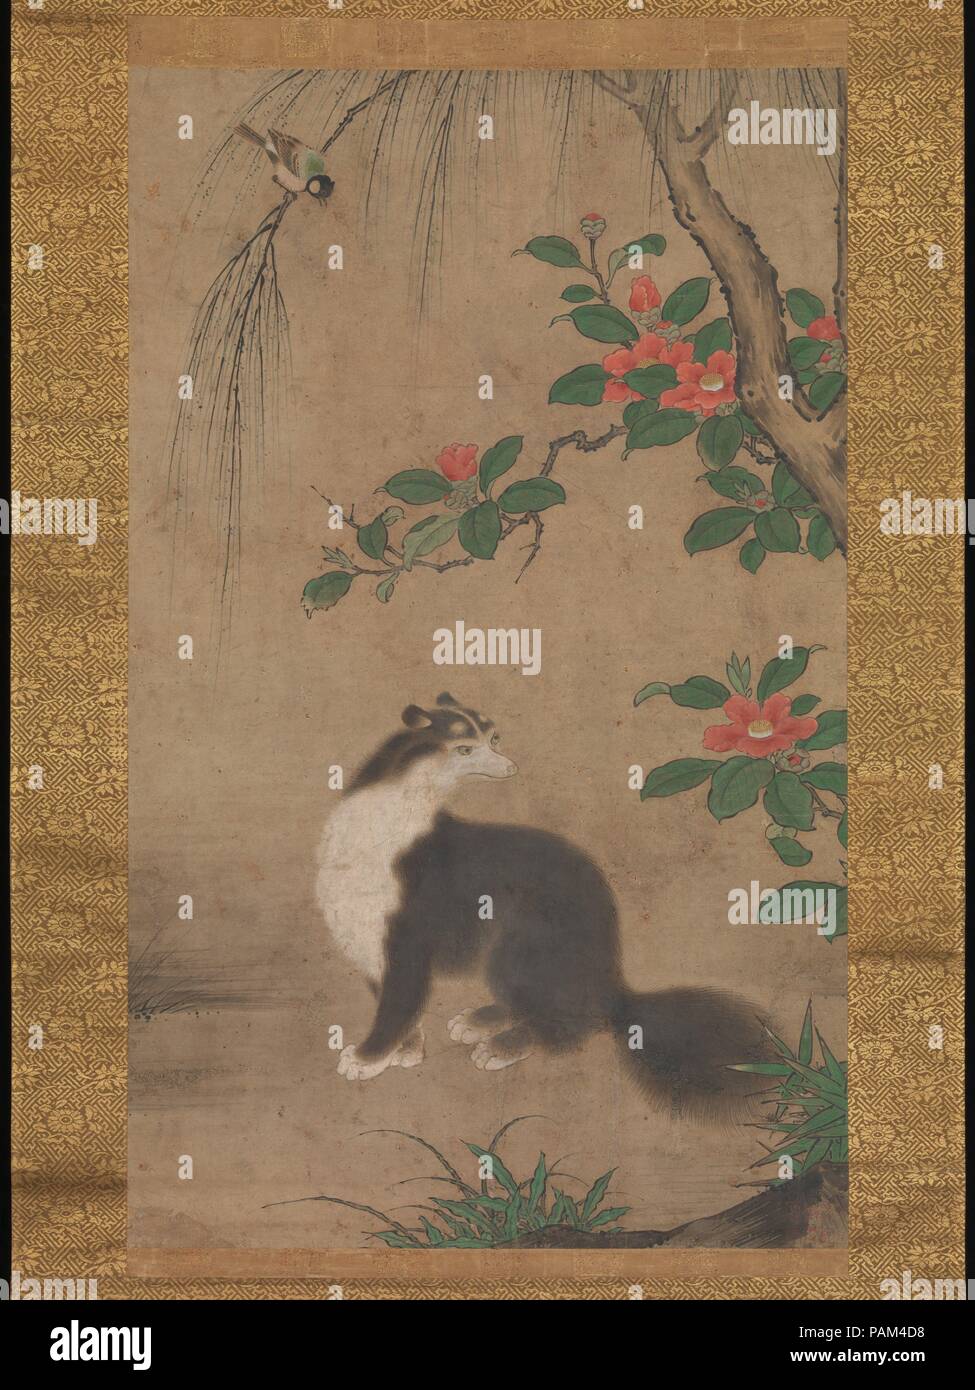 Musk Cat. Artist: Uto Gyoshi (Japanese, active second half of 16th century). Culture: Japan. Dimensions: Image: 29 15/16 × 18 5/16 in. (76 × 46.5 cm)  Overall with mounting: 66 1/8 × 24 1/8 in. (168 × 61.3 cm)  Overall with knobs: 66 1/8 × 25 7/8 in. (168 × 65.8 cm). Date: second half of the 16th century.  A fluffy black-and-white musk cat does its best to ignore the agitated titmouse on a willow branch above him. Although not native to Japan, musk cats (jakoneko), or civets, served as an auspicious motif associated with longevity. These nocturnal, cat-like mammals with long pointed snouts wer Stock Photo